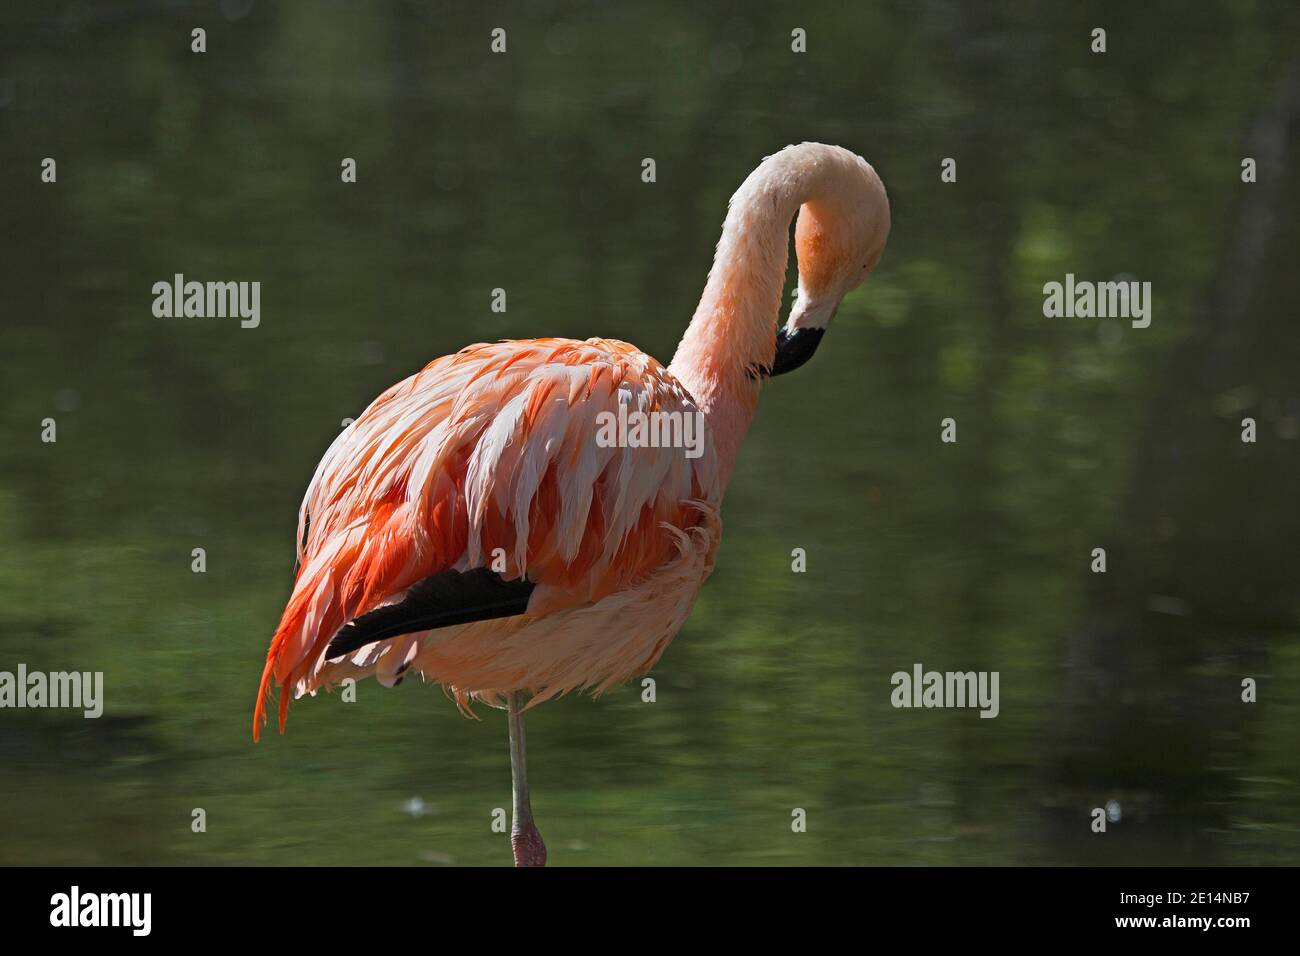 Characteristic Of The Flamingo, Its Splendidly Colored Pink Plumage And The Effortless Standing On One Foot Stock Photo